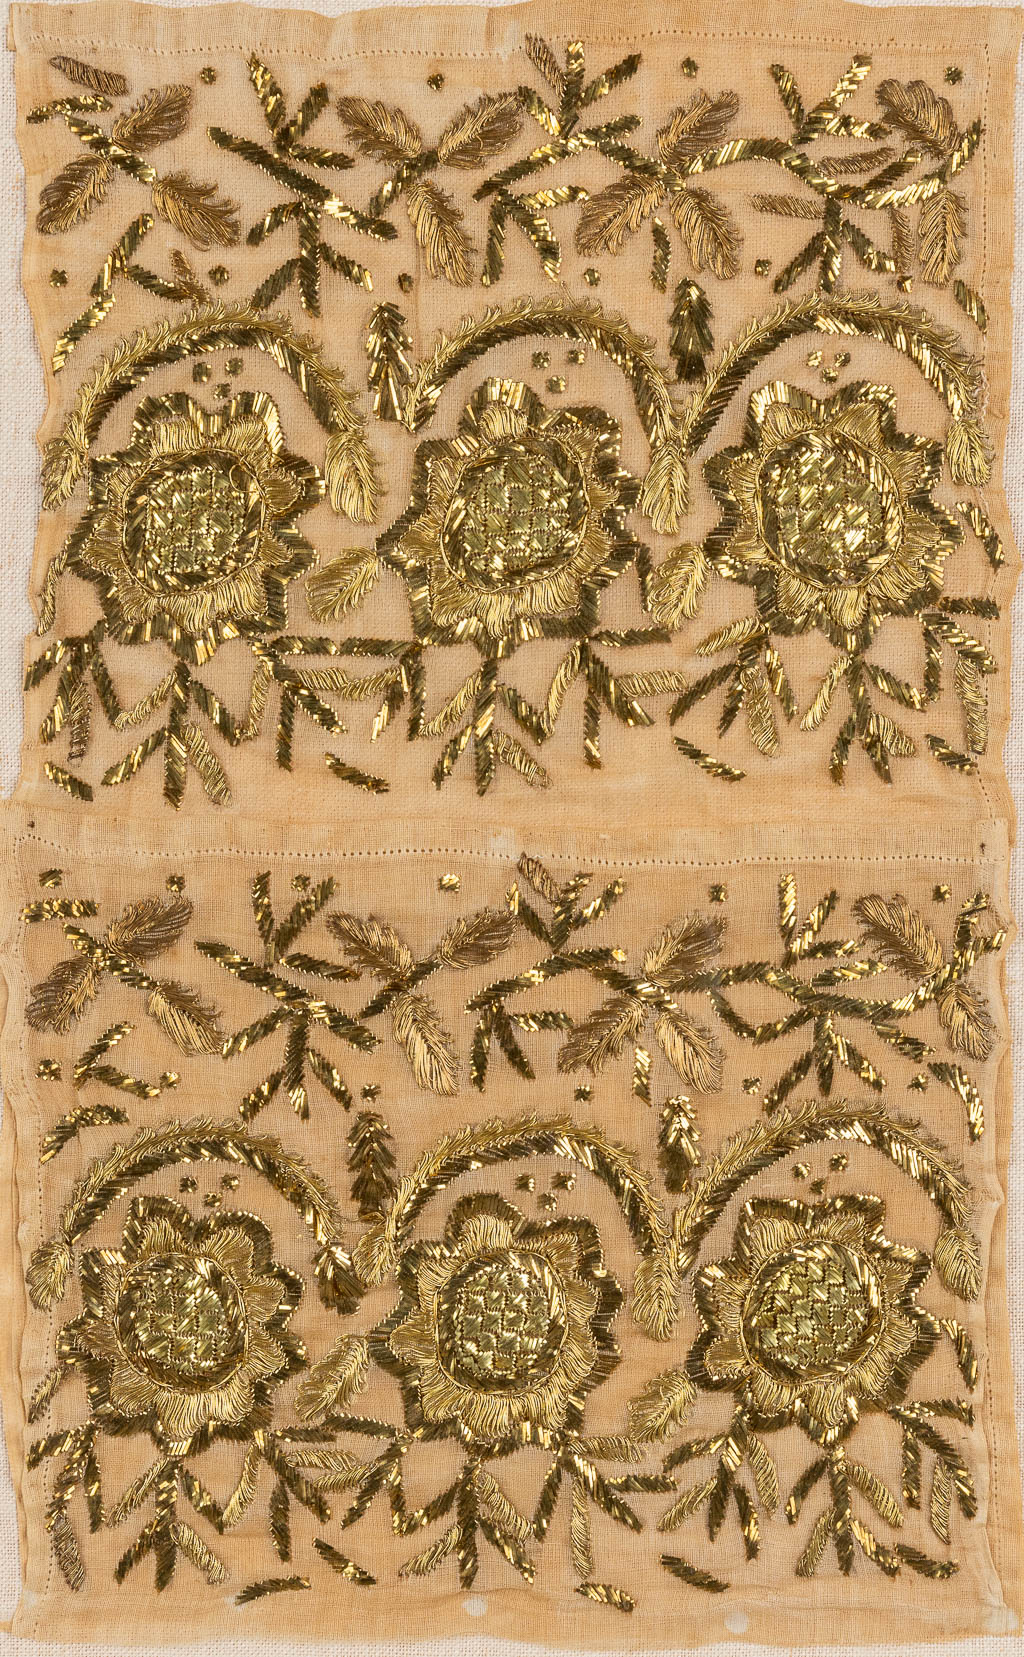 A small frame with gold-thread embroideries. (W:23 x H:37 cm)